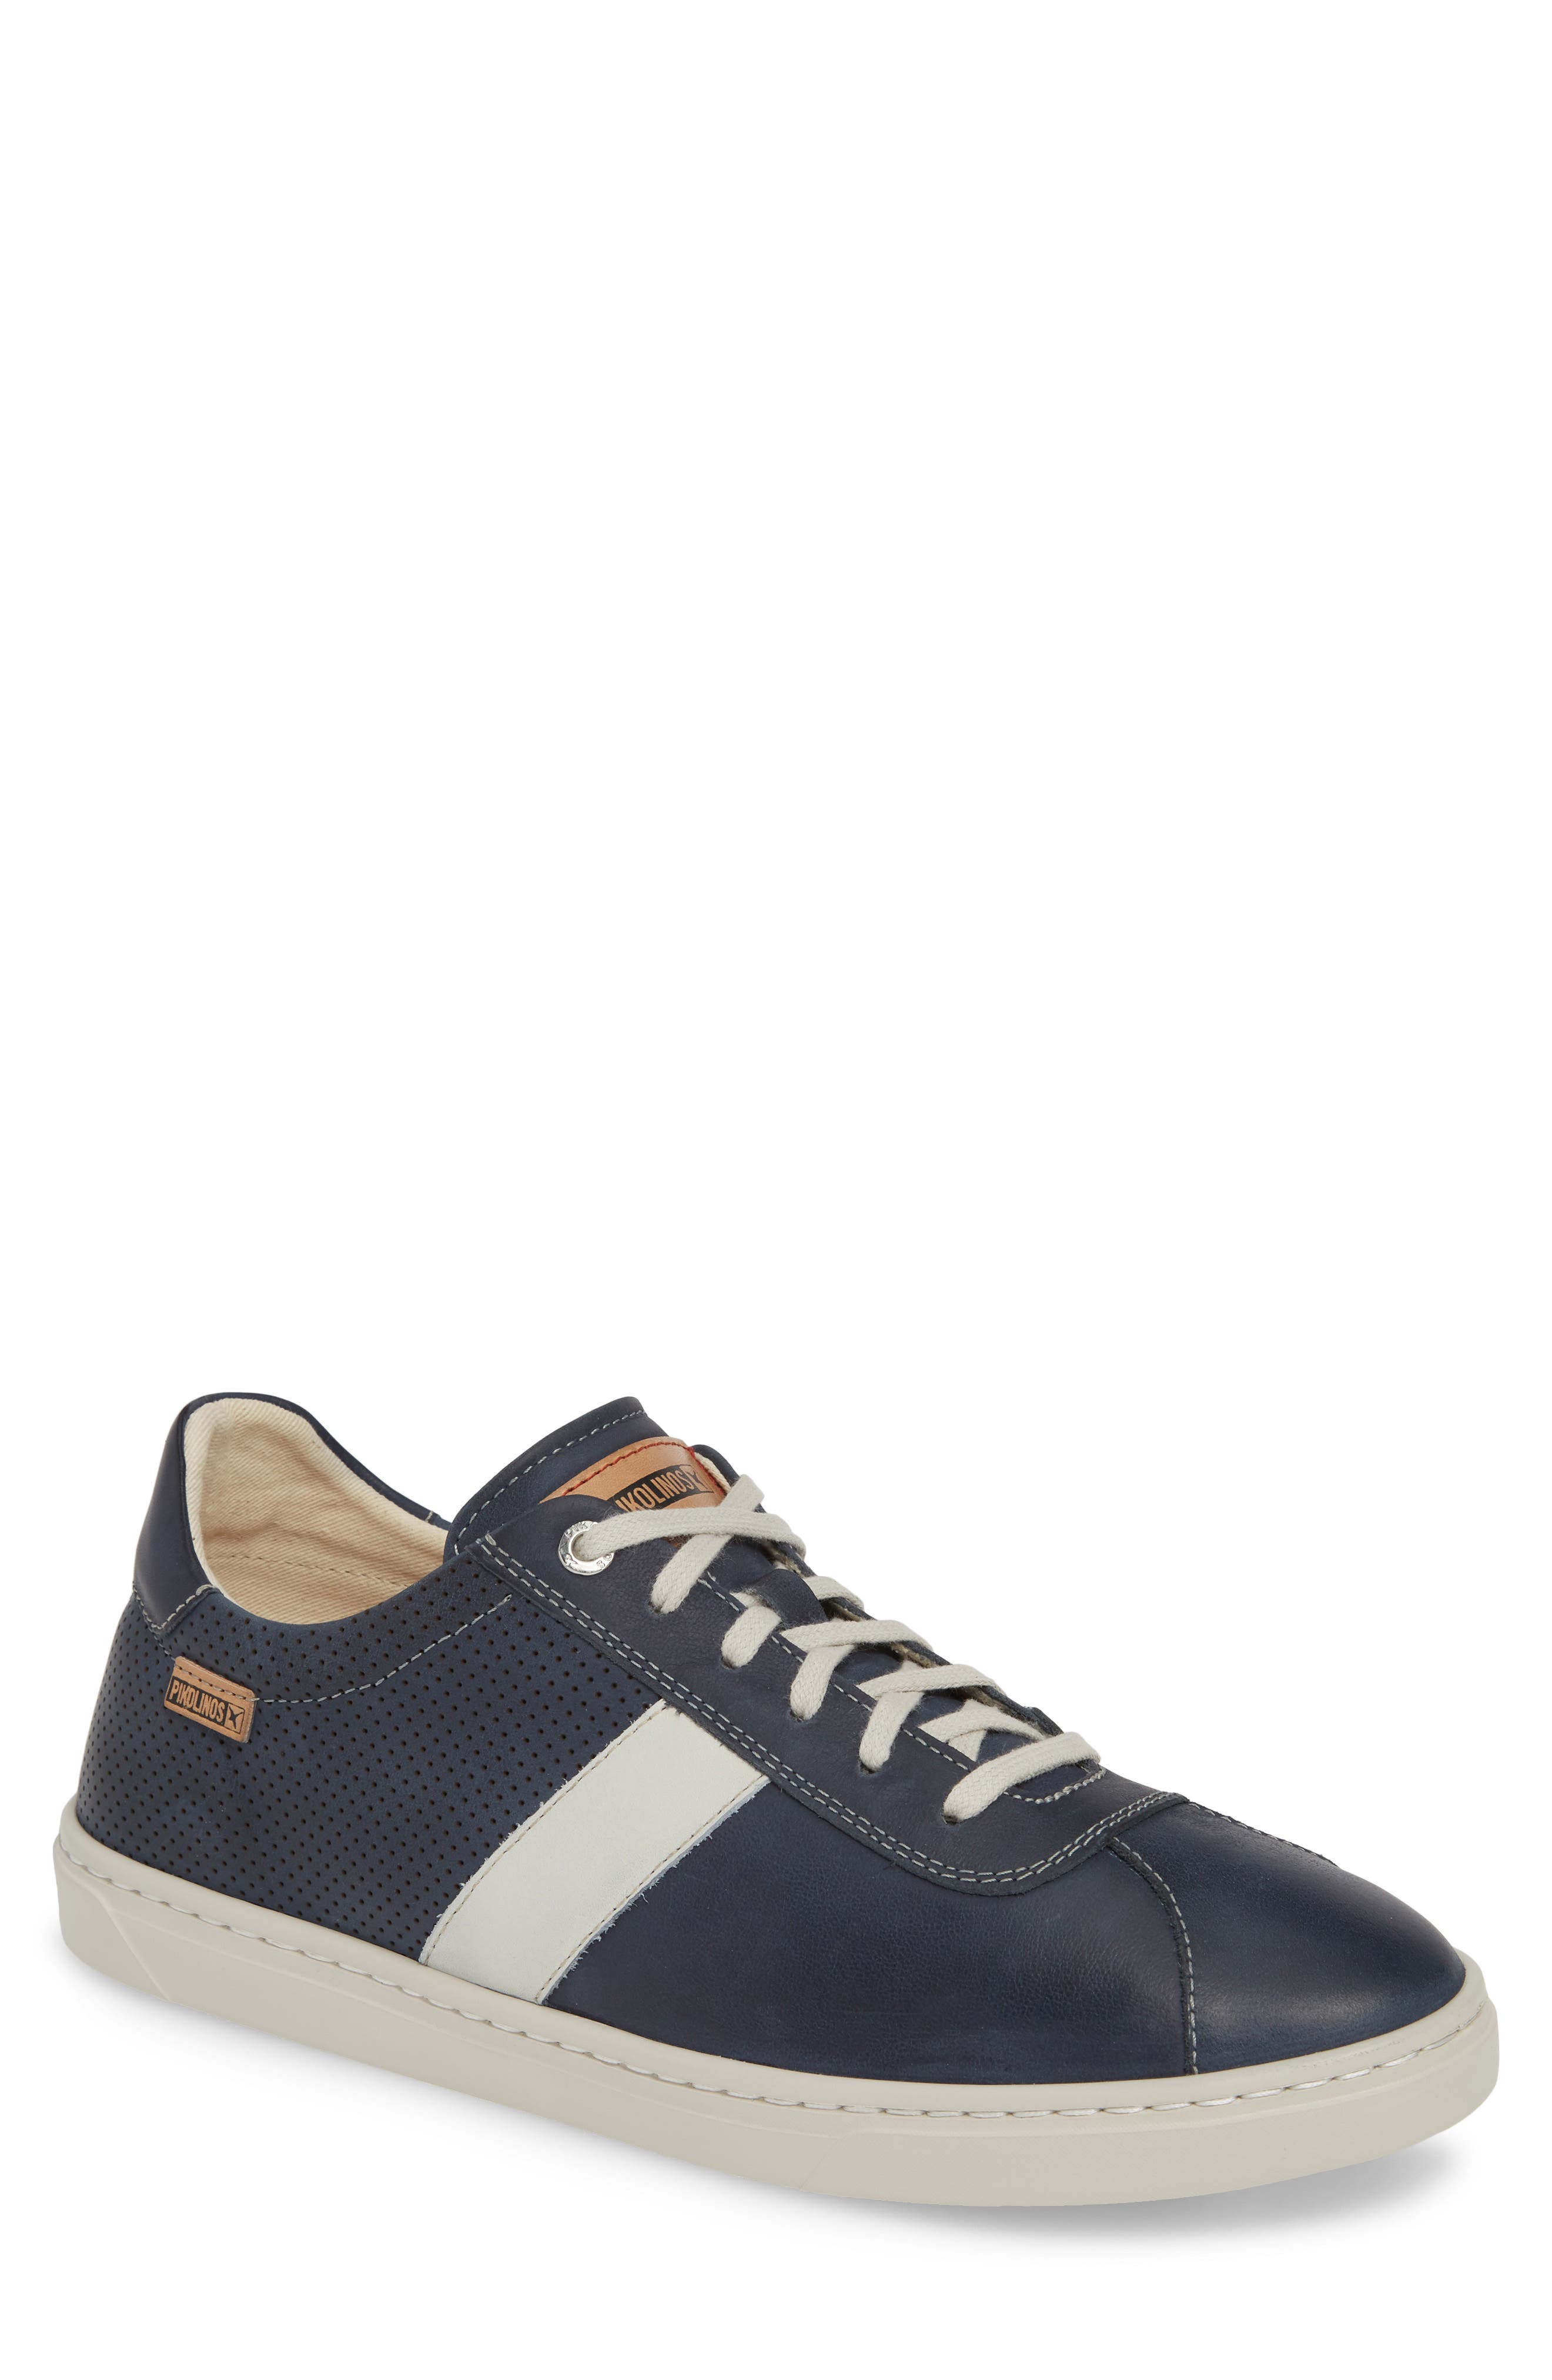 Pikolinos - Men's Casual Fashion Shoes and Sneakers